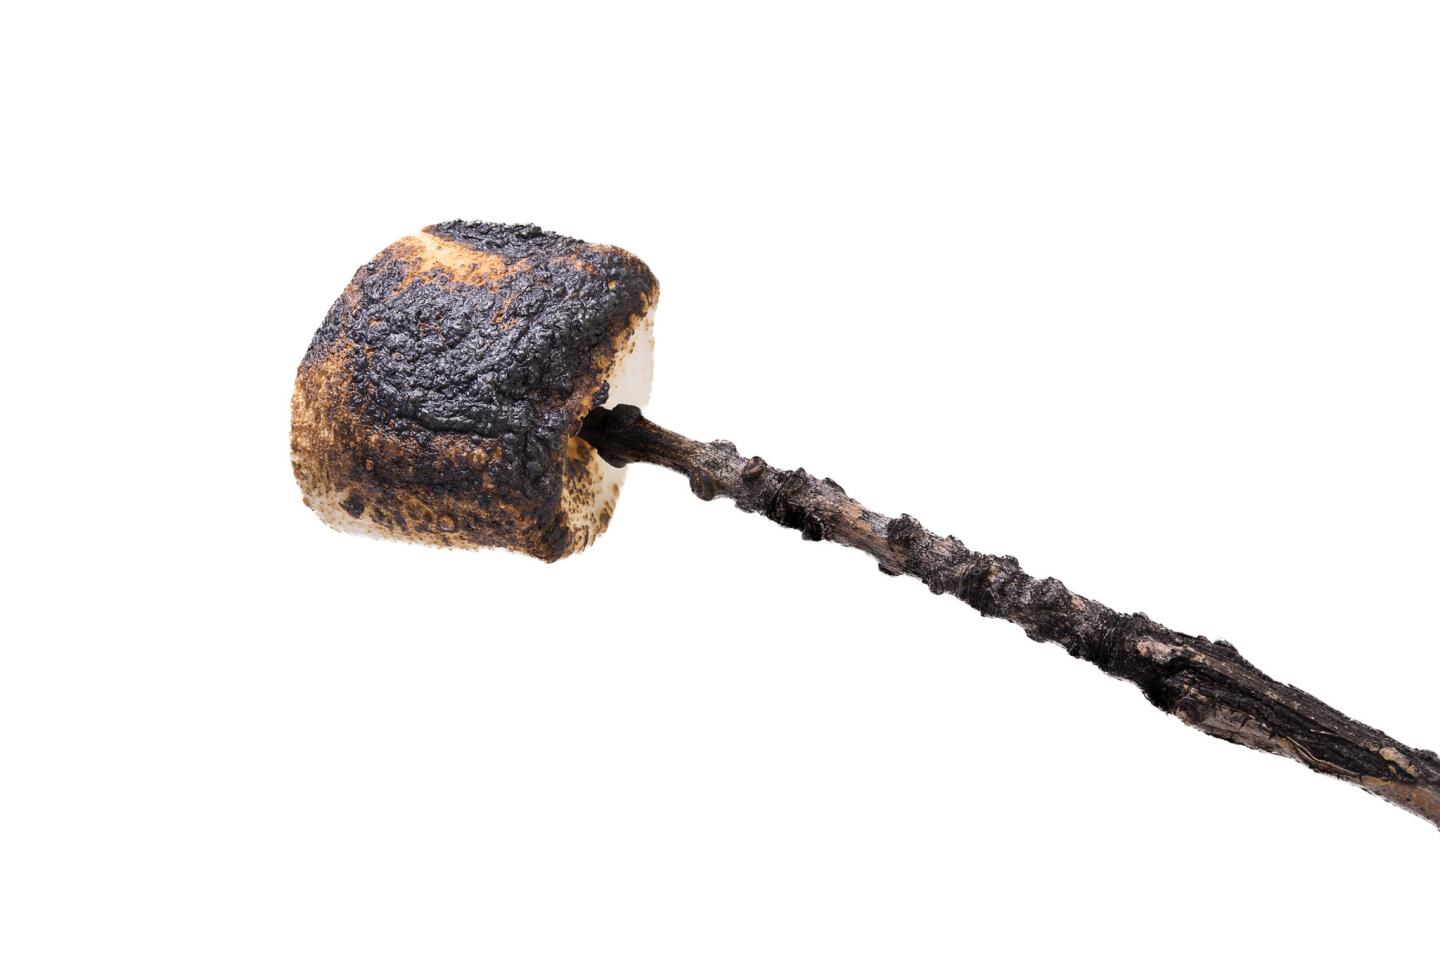 When roasting marshmallows on an open fire, leave them there extra long for a nice charred flavor.